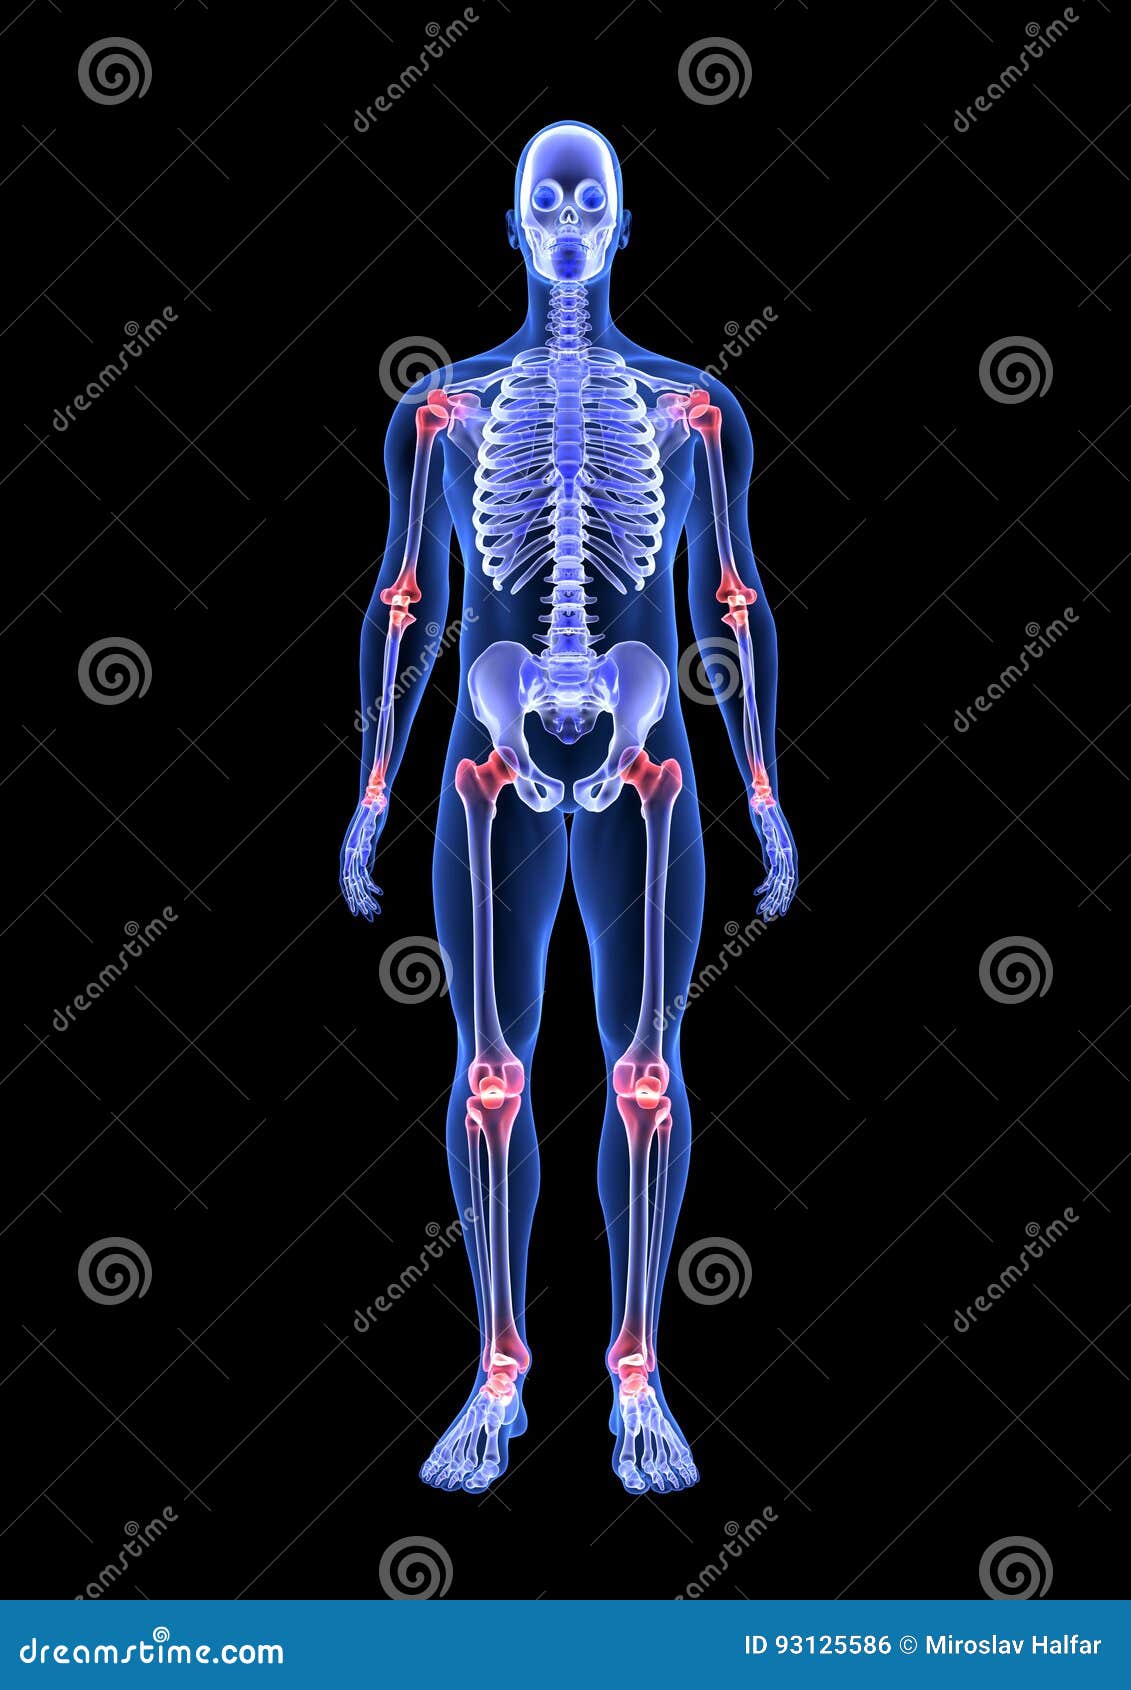 Blue Human Anatomy Body And Skeleton 3d Scan Render On Black Background A65